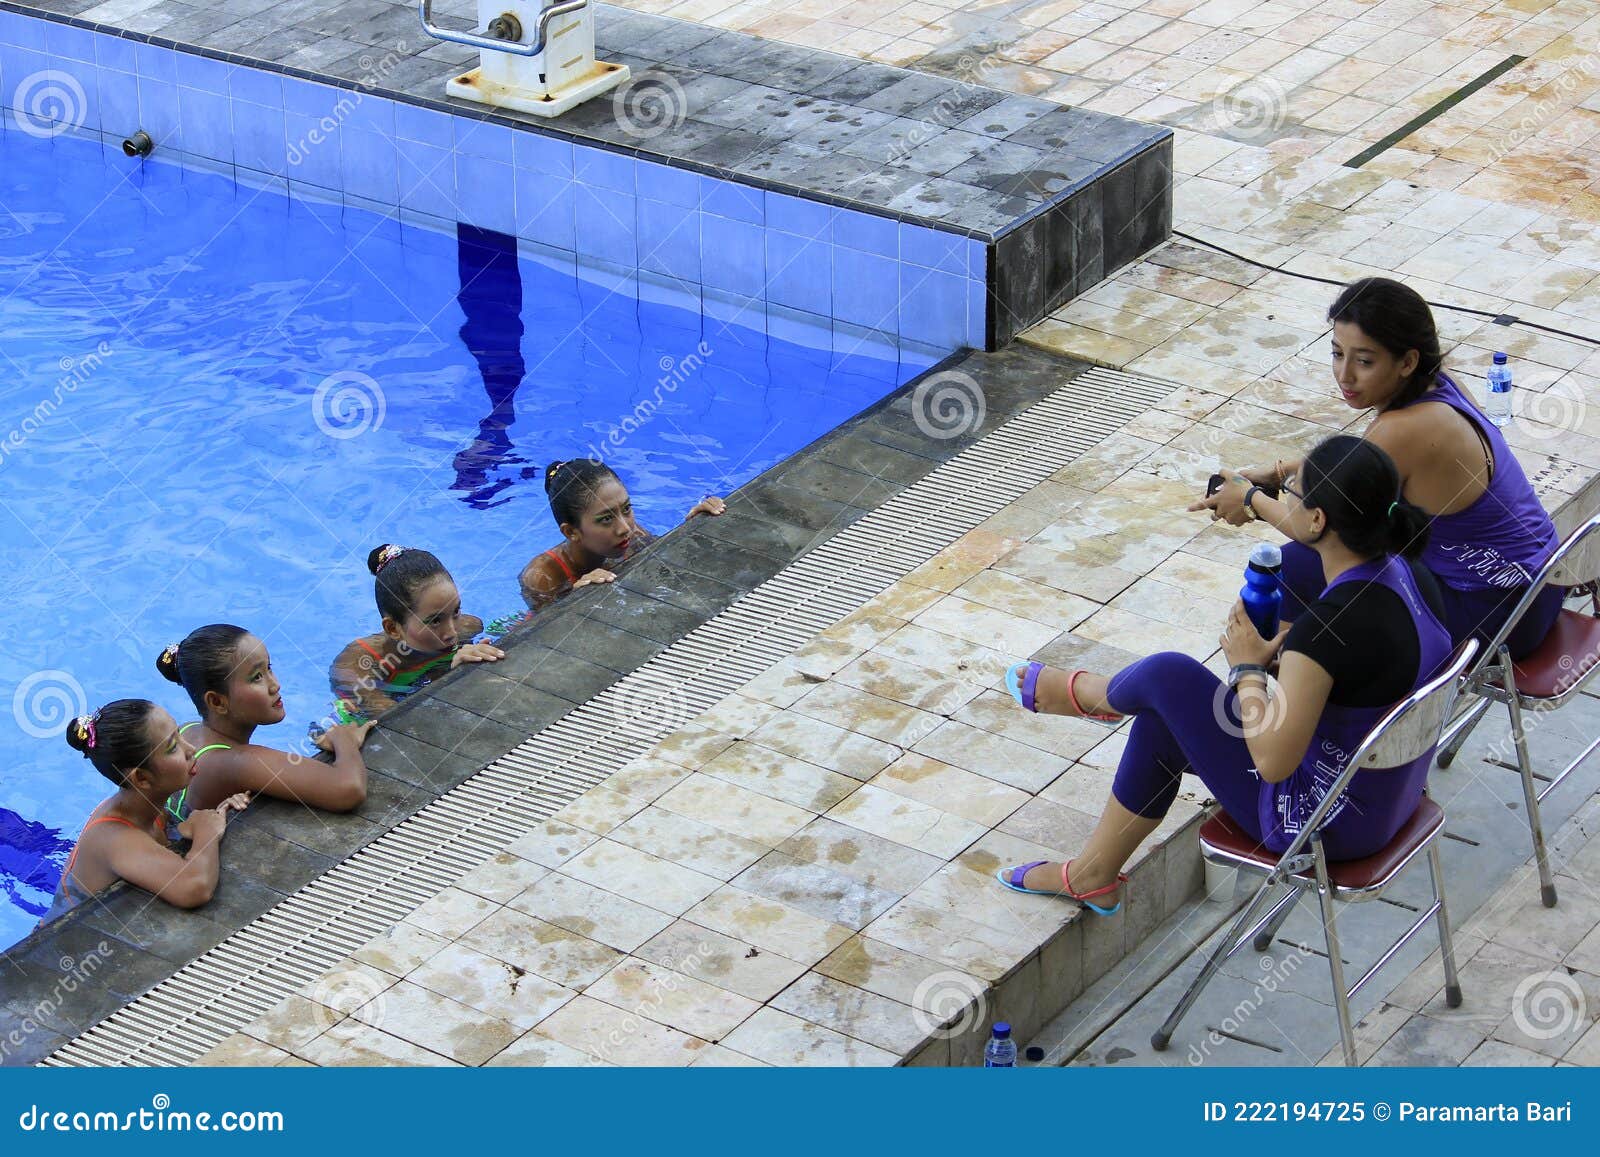 Five Swimmers Racing Against Each Other In A Swiming Pool Editorial